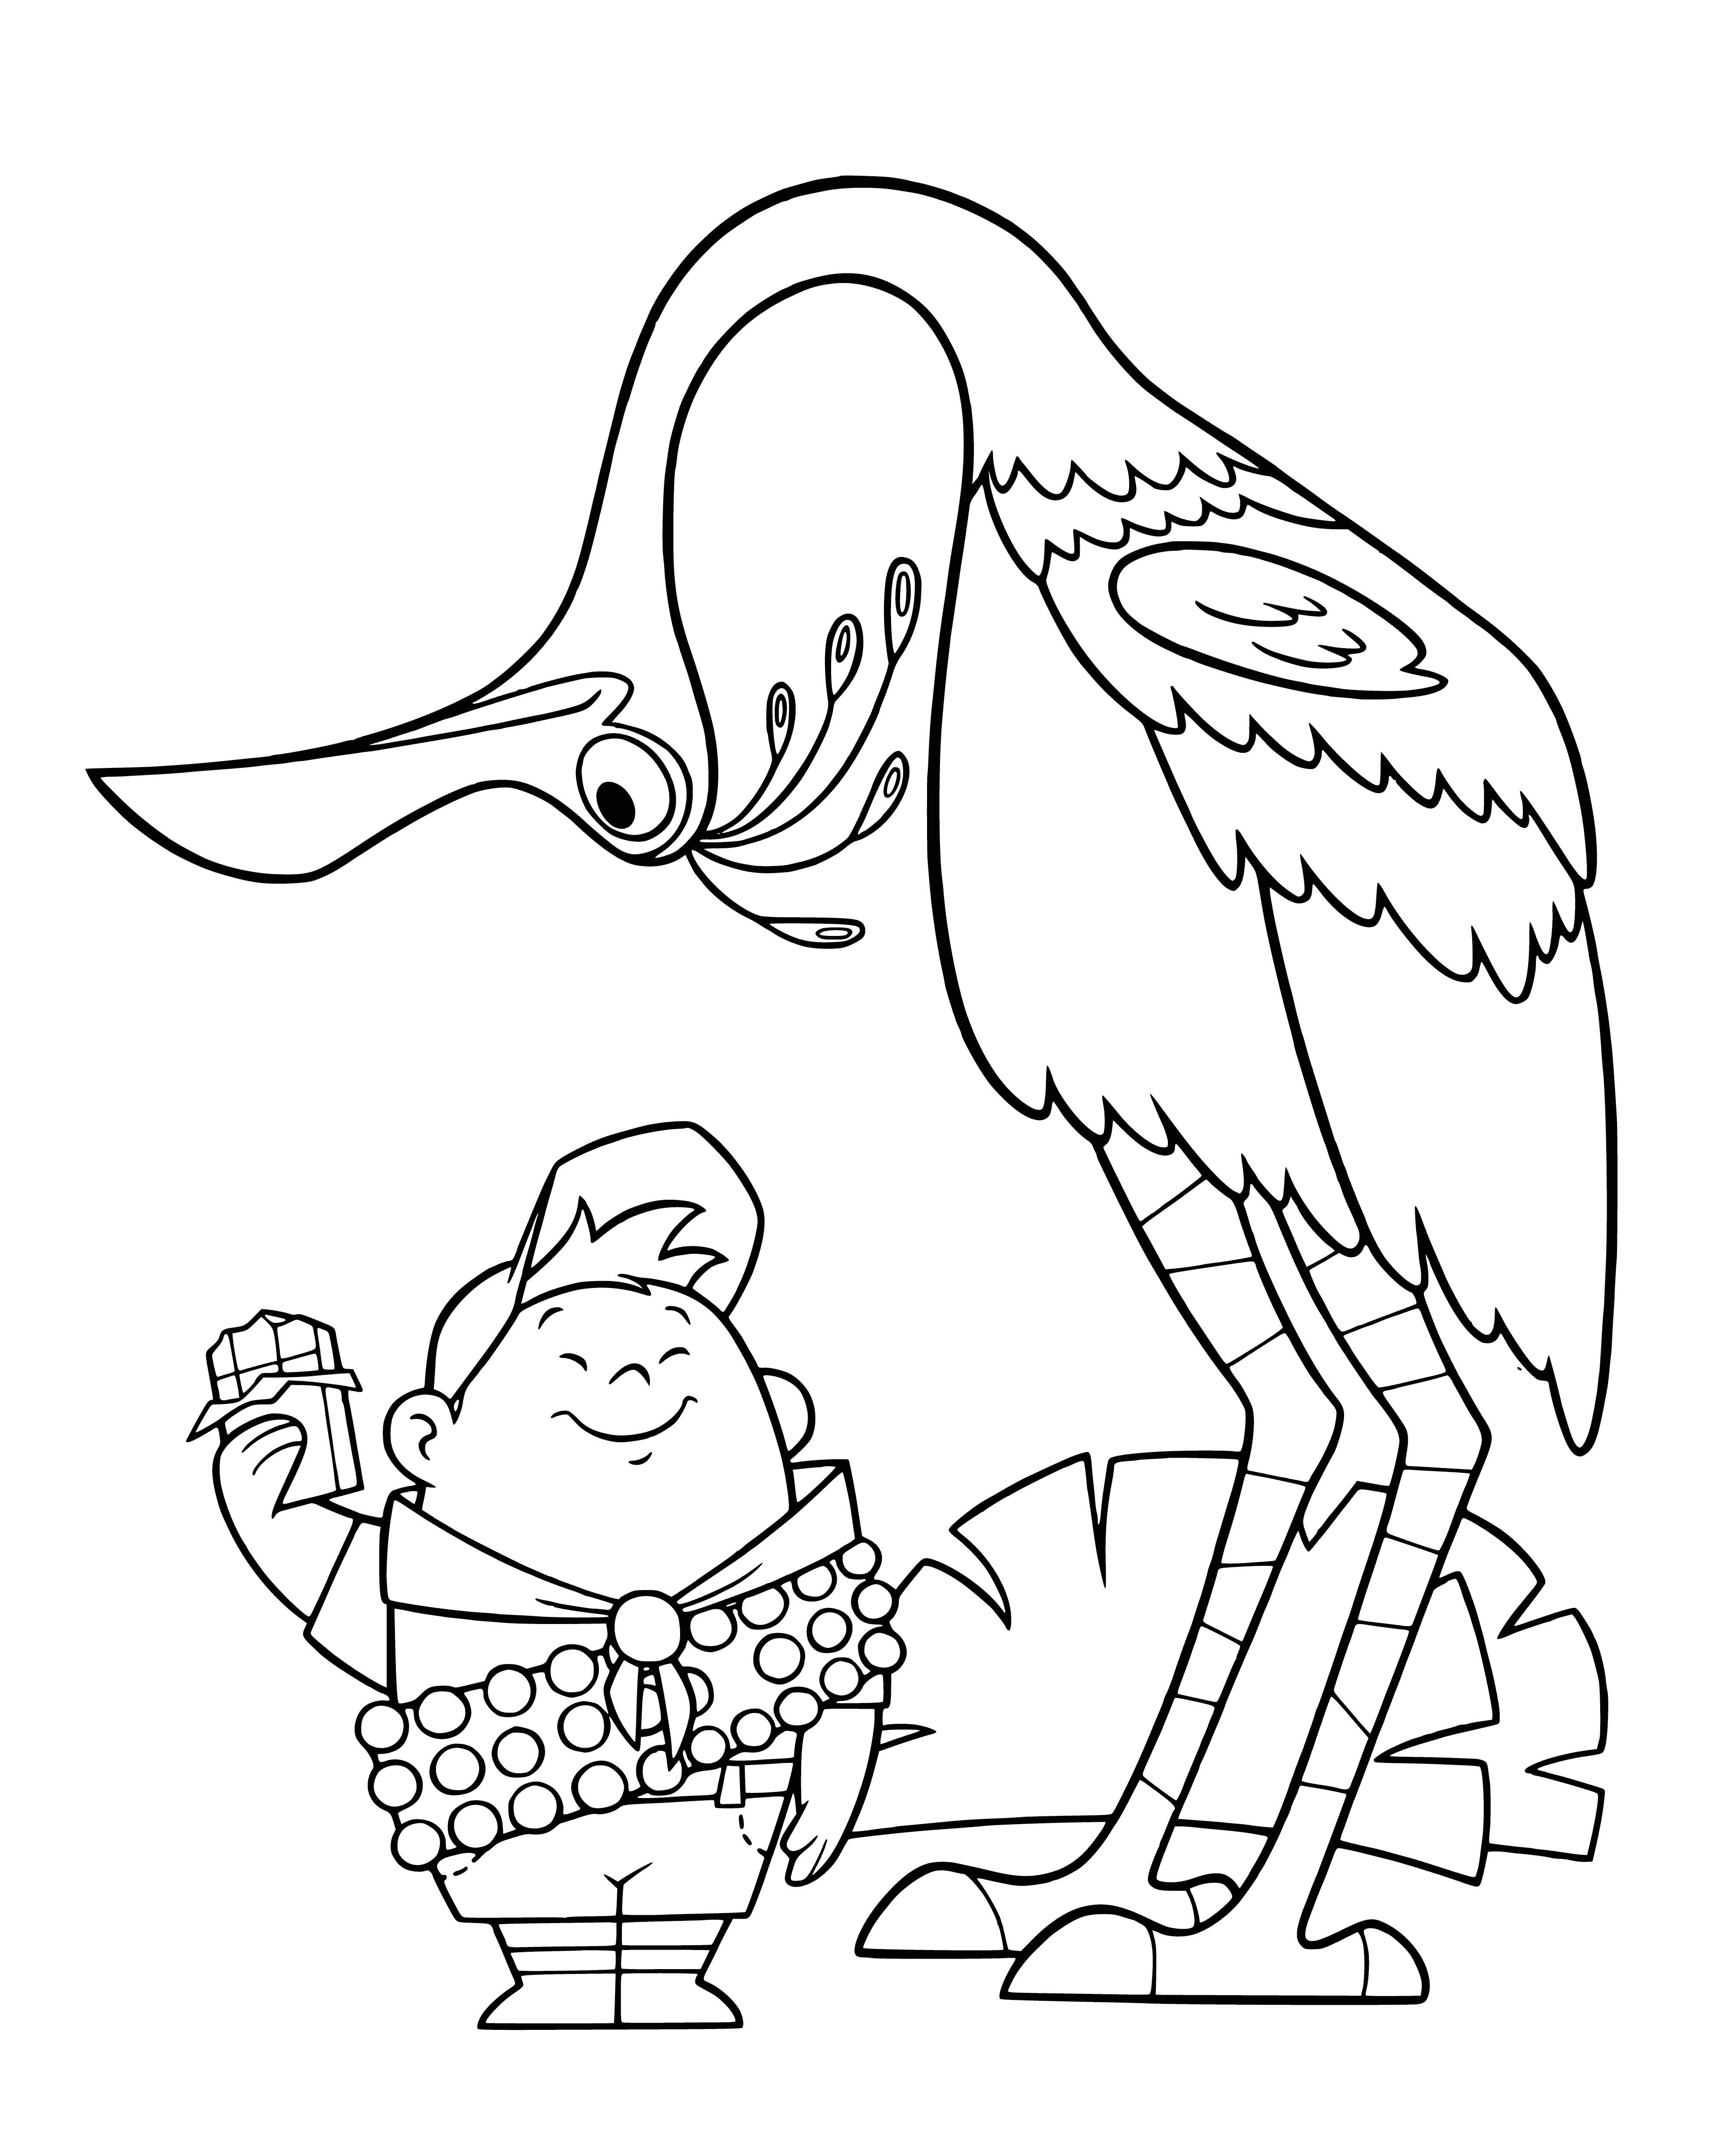 coloring page: A cartoon character named Russell is standing in a puddle of melting chocolate on a block of chocolate. #cartoon #character #chocolate